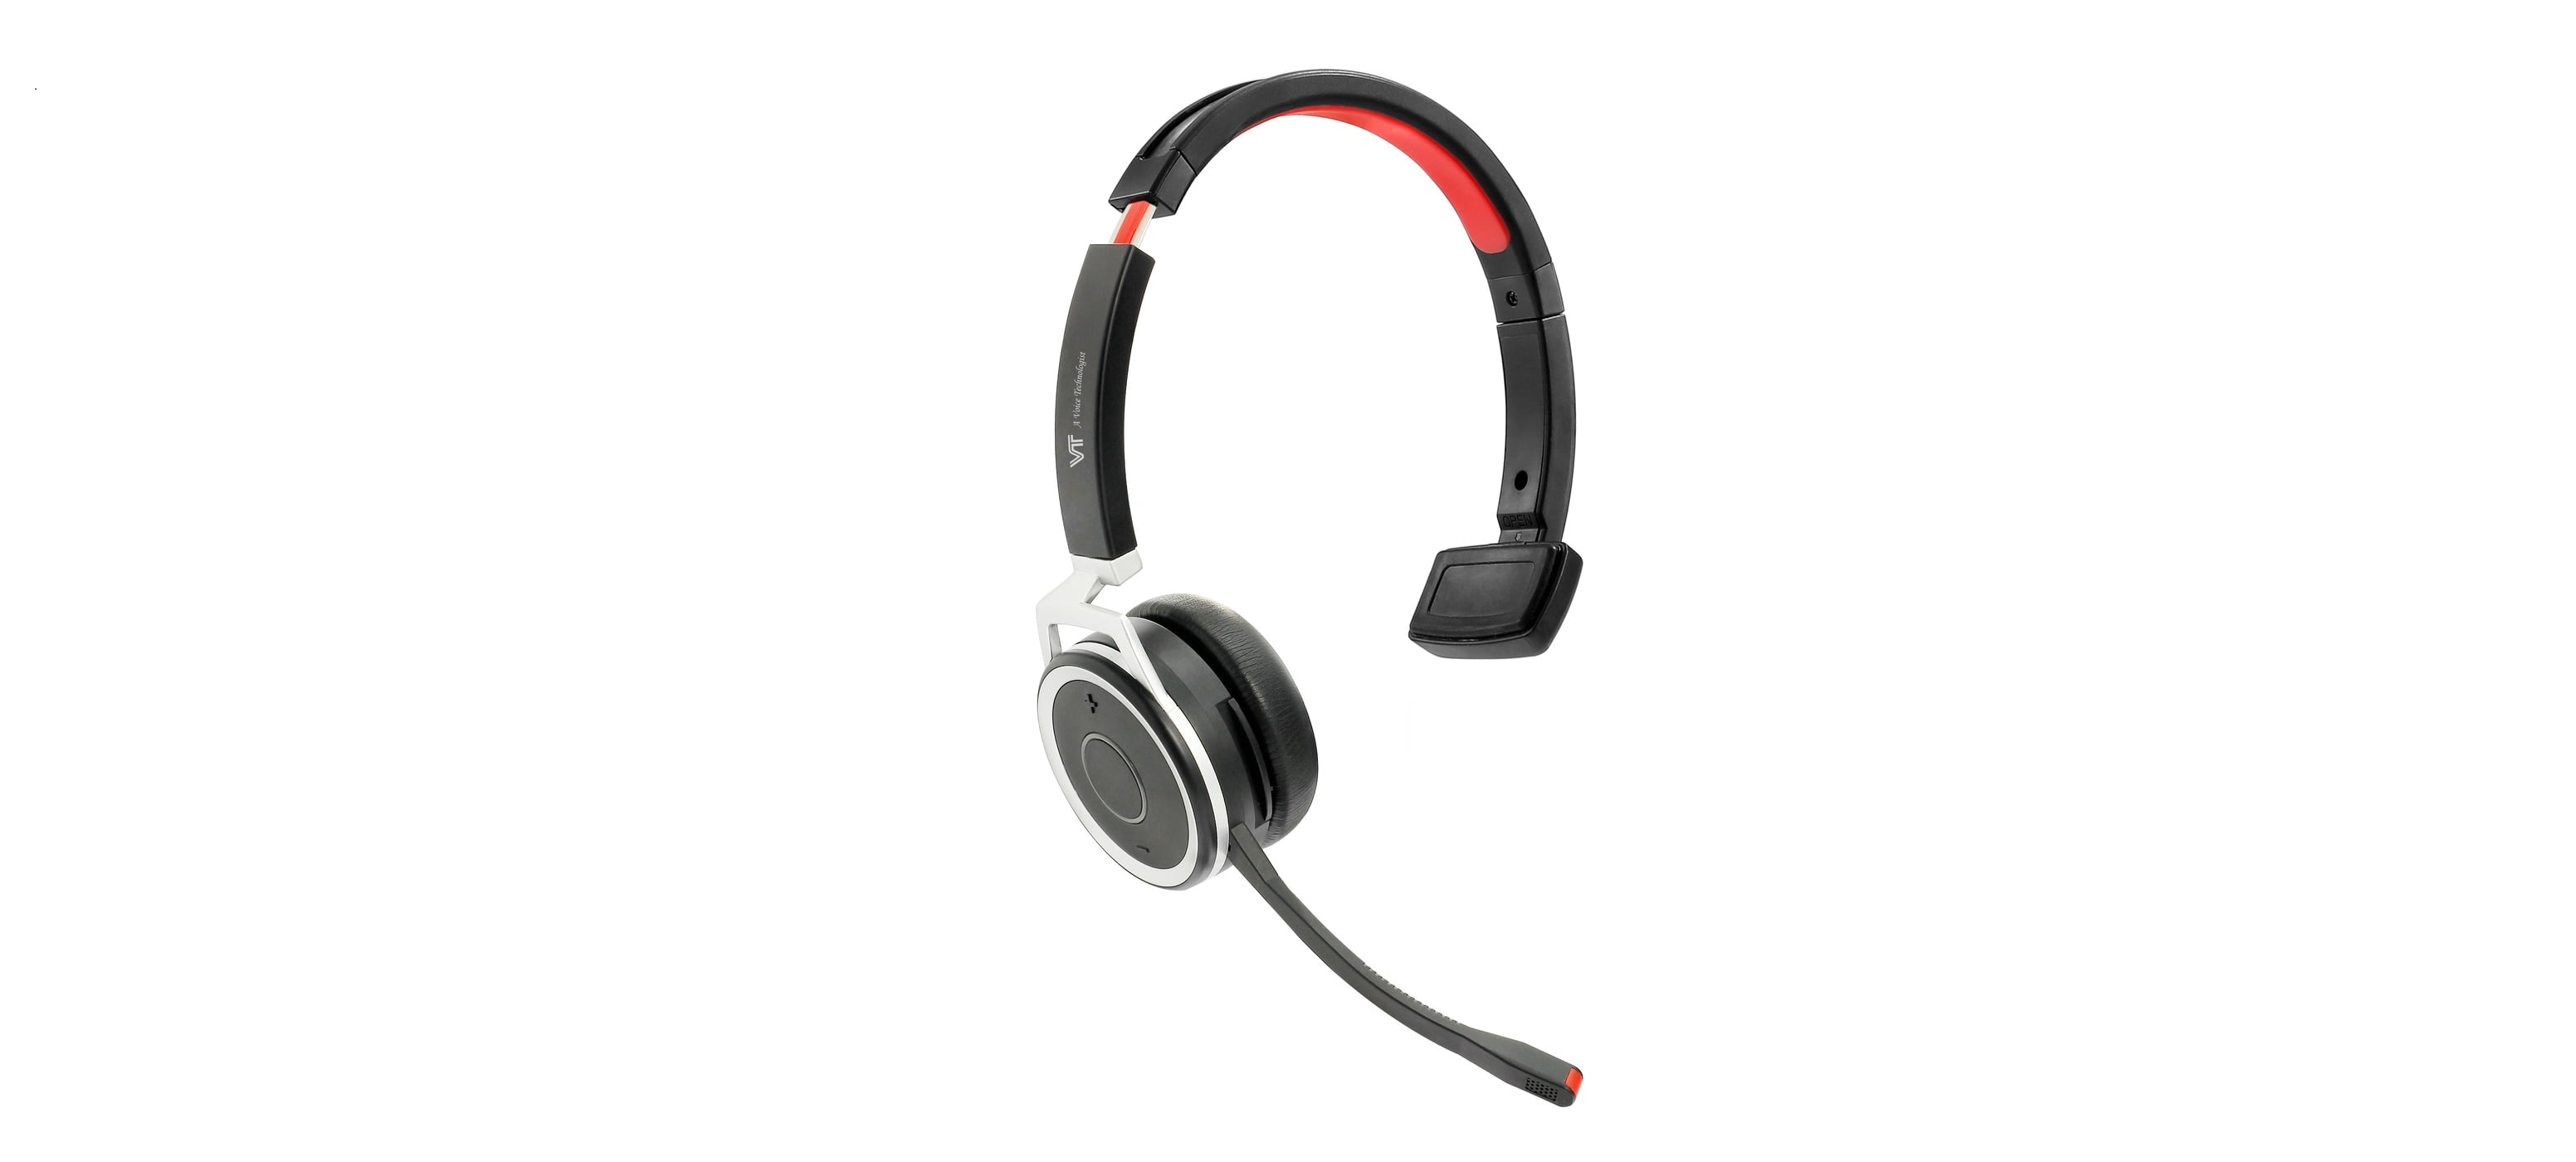 top range monaural headset for daily usage